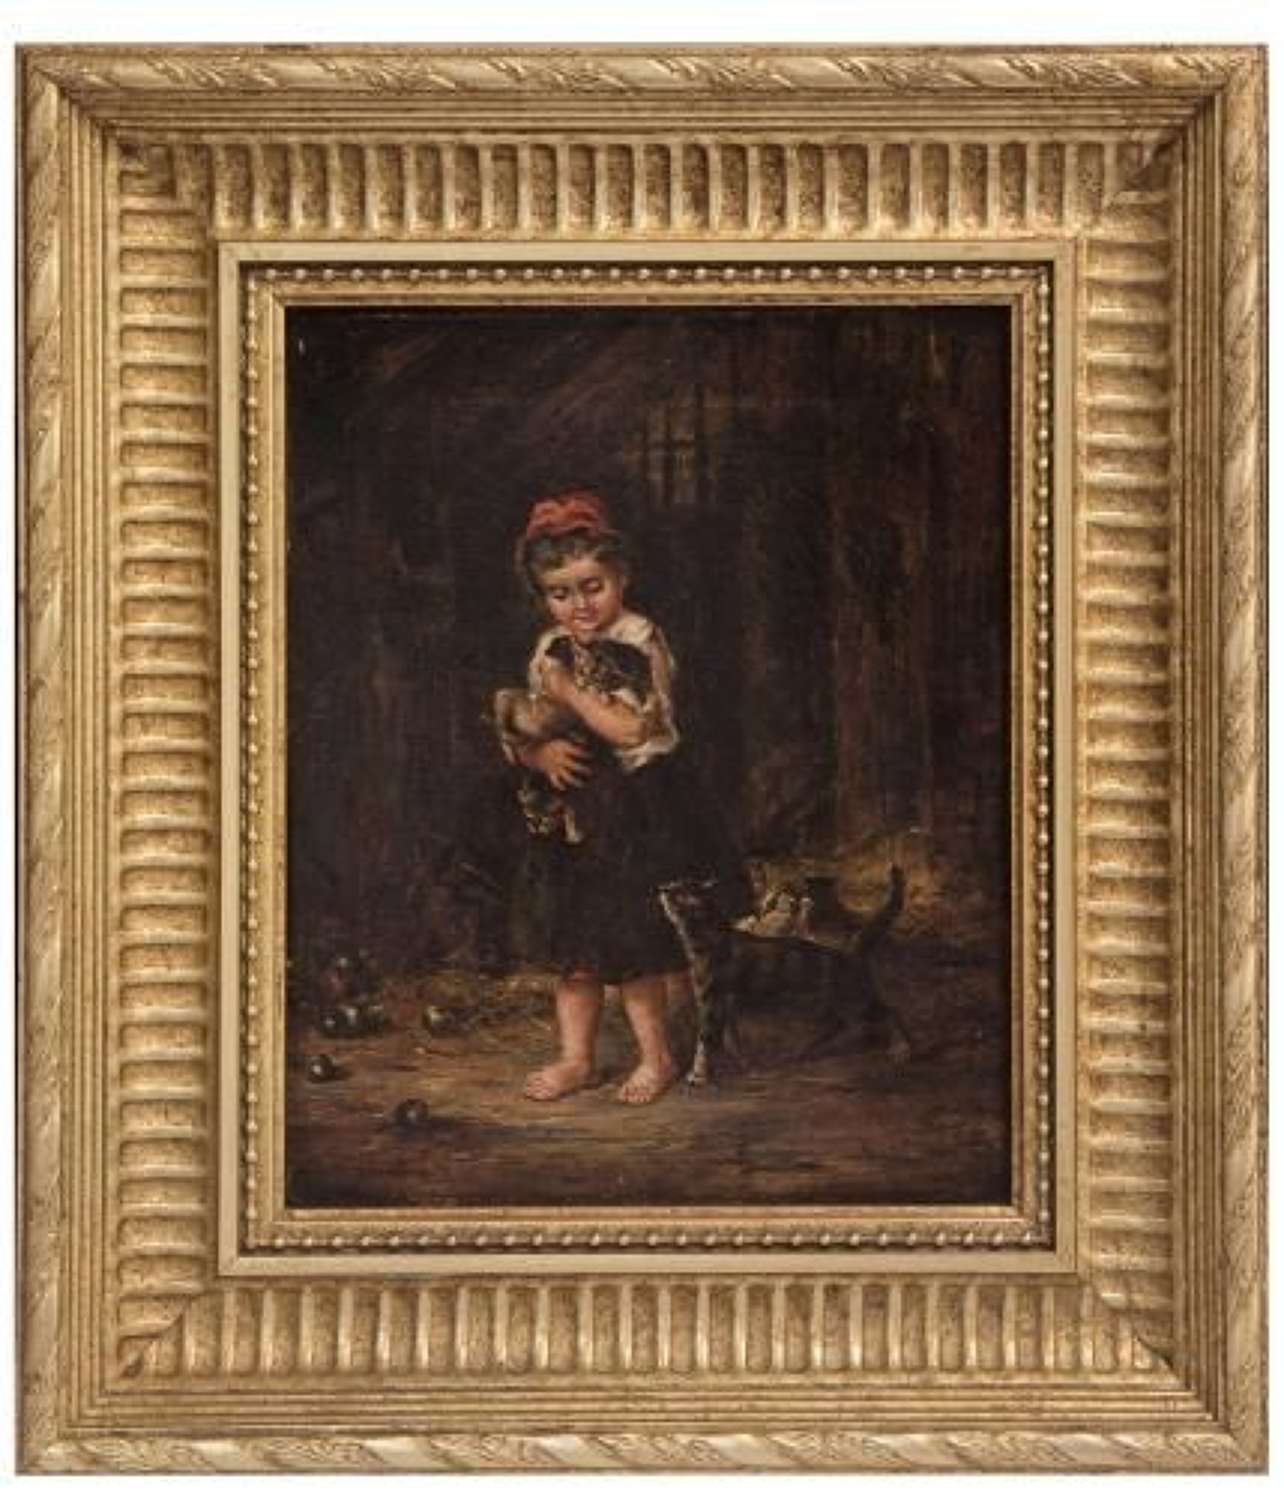 A Charming 19thc Oil on Canvas - Girl with Kittens